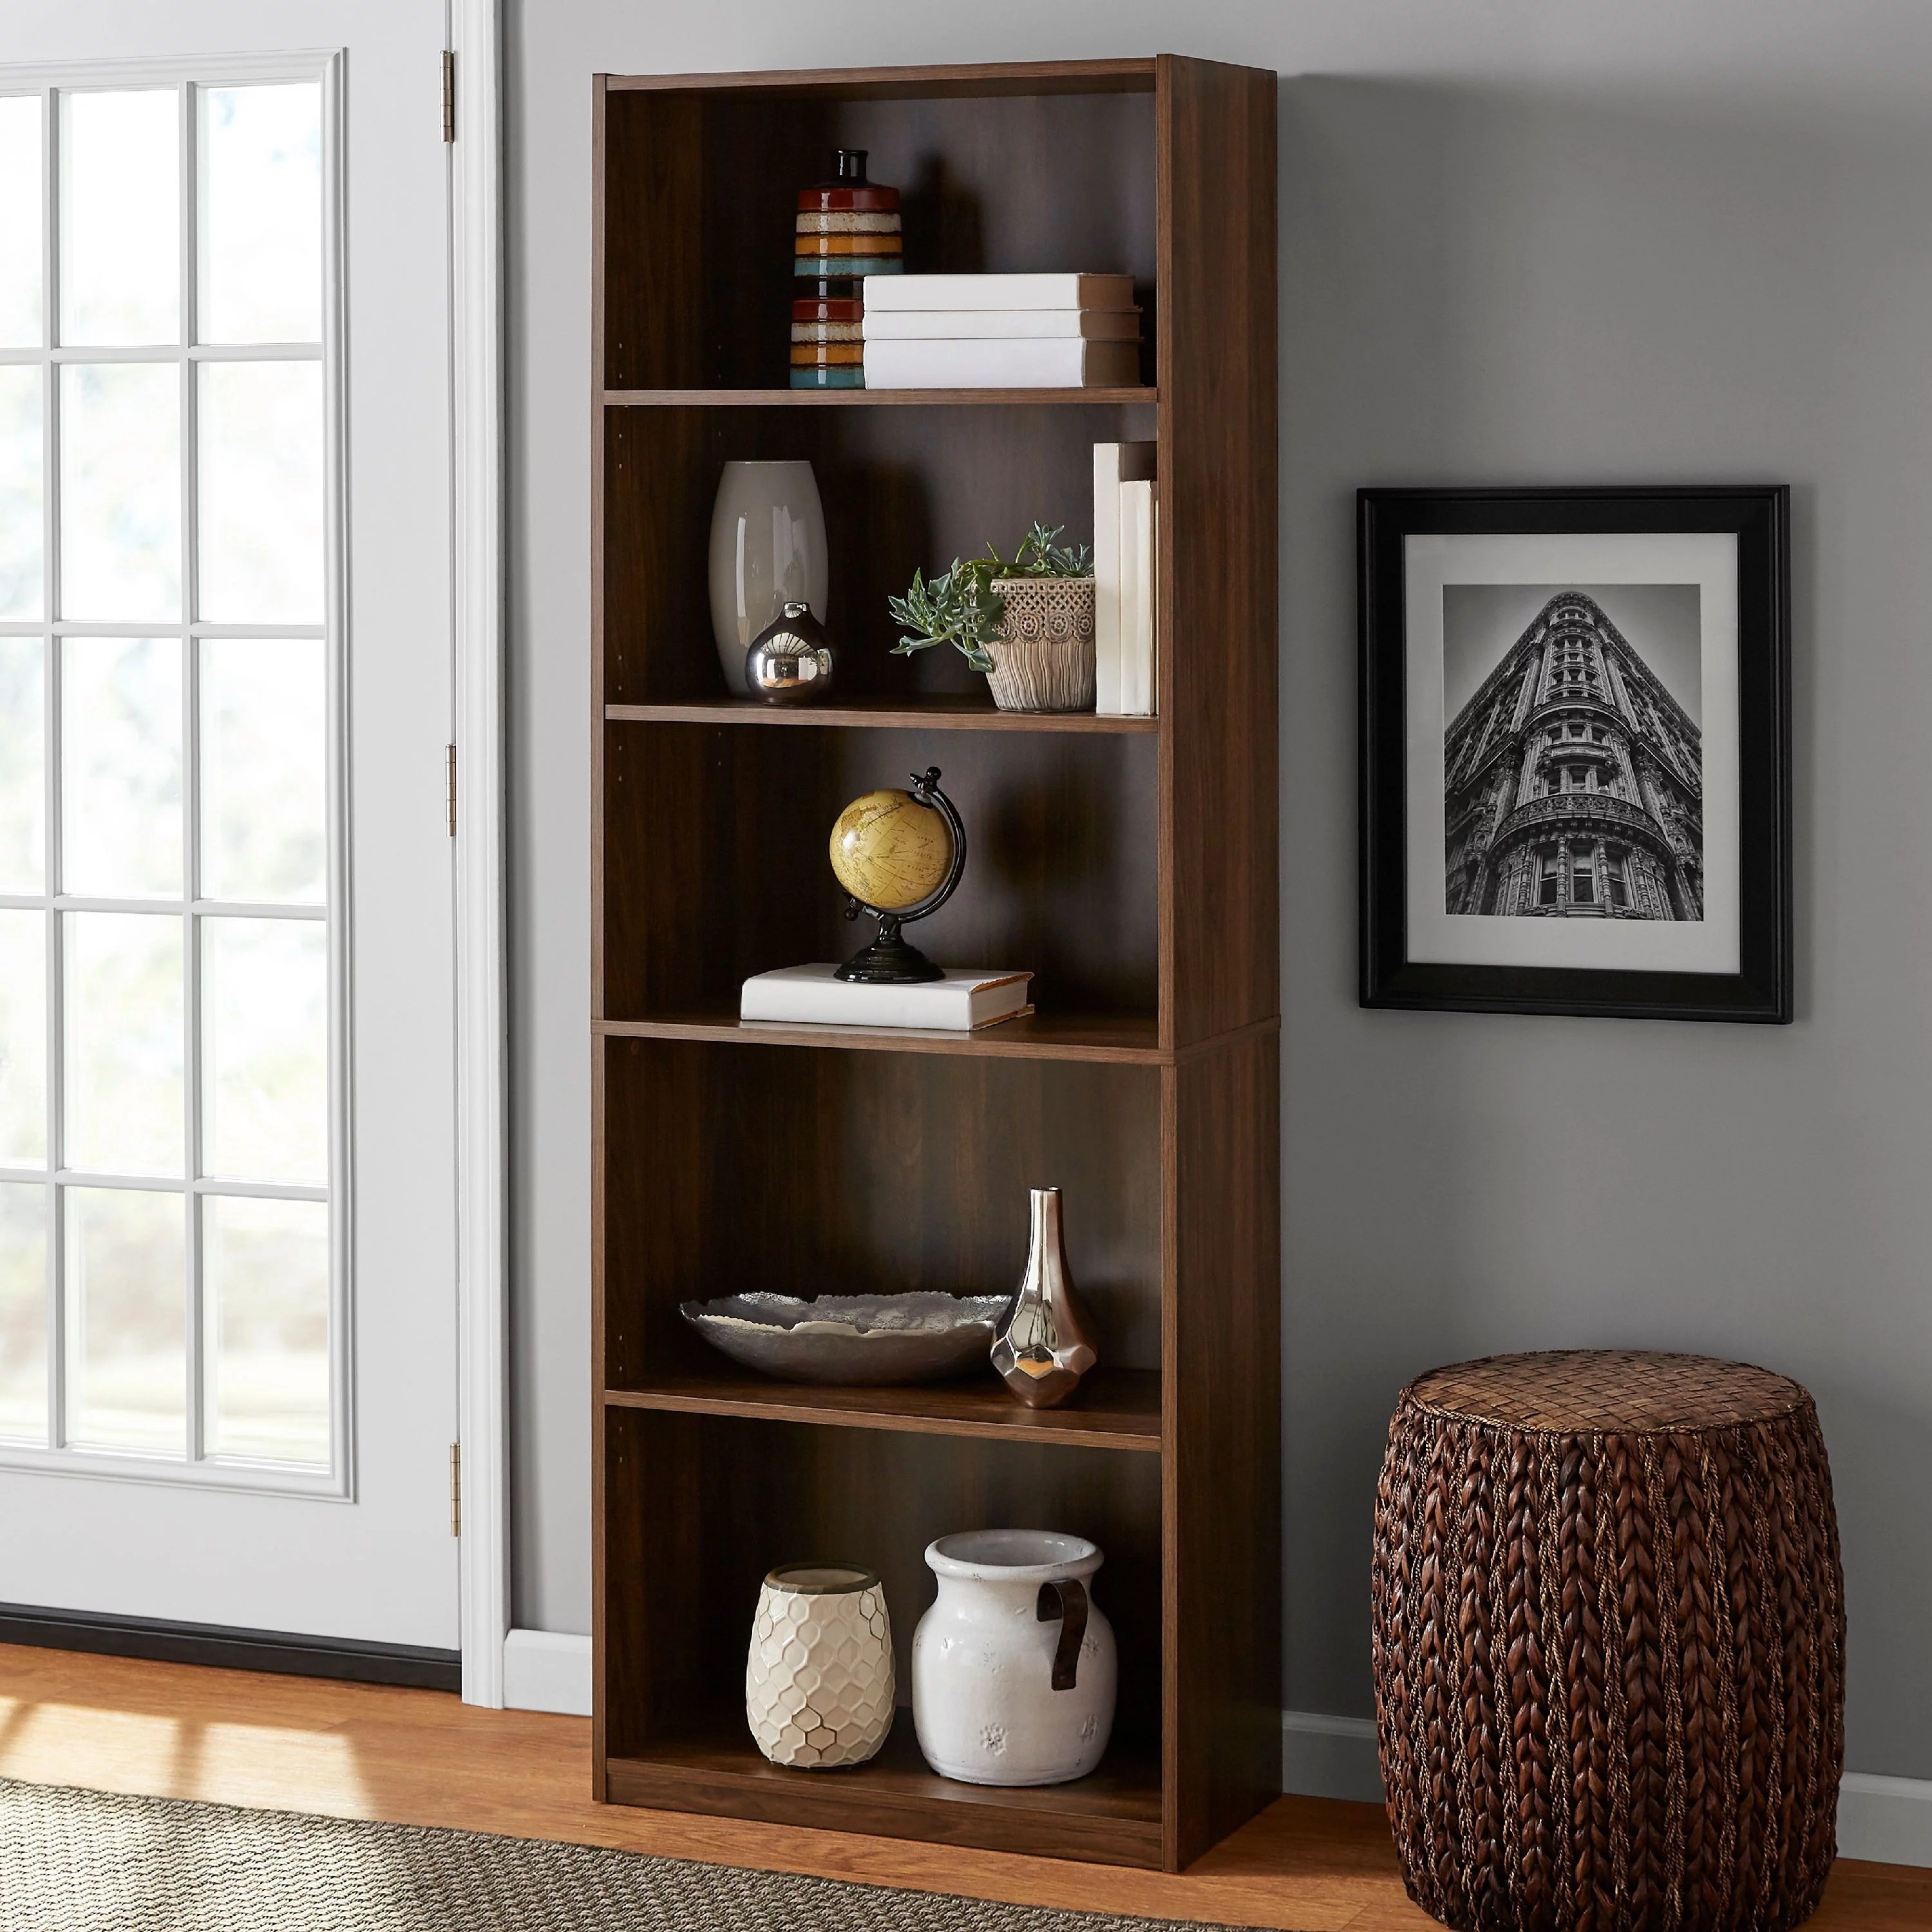 a canyon walnut colored bookcase holding books and home pieces